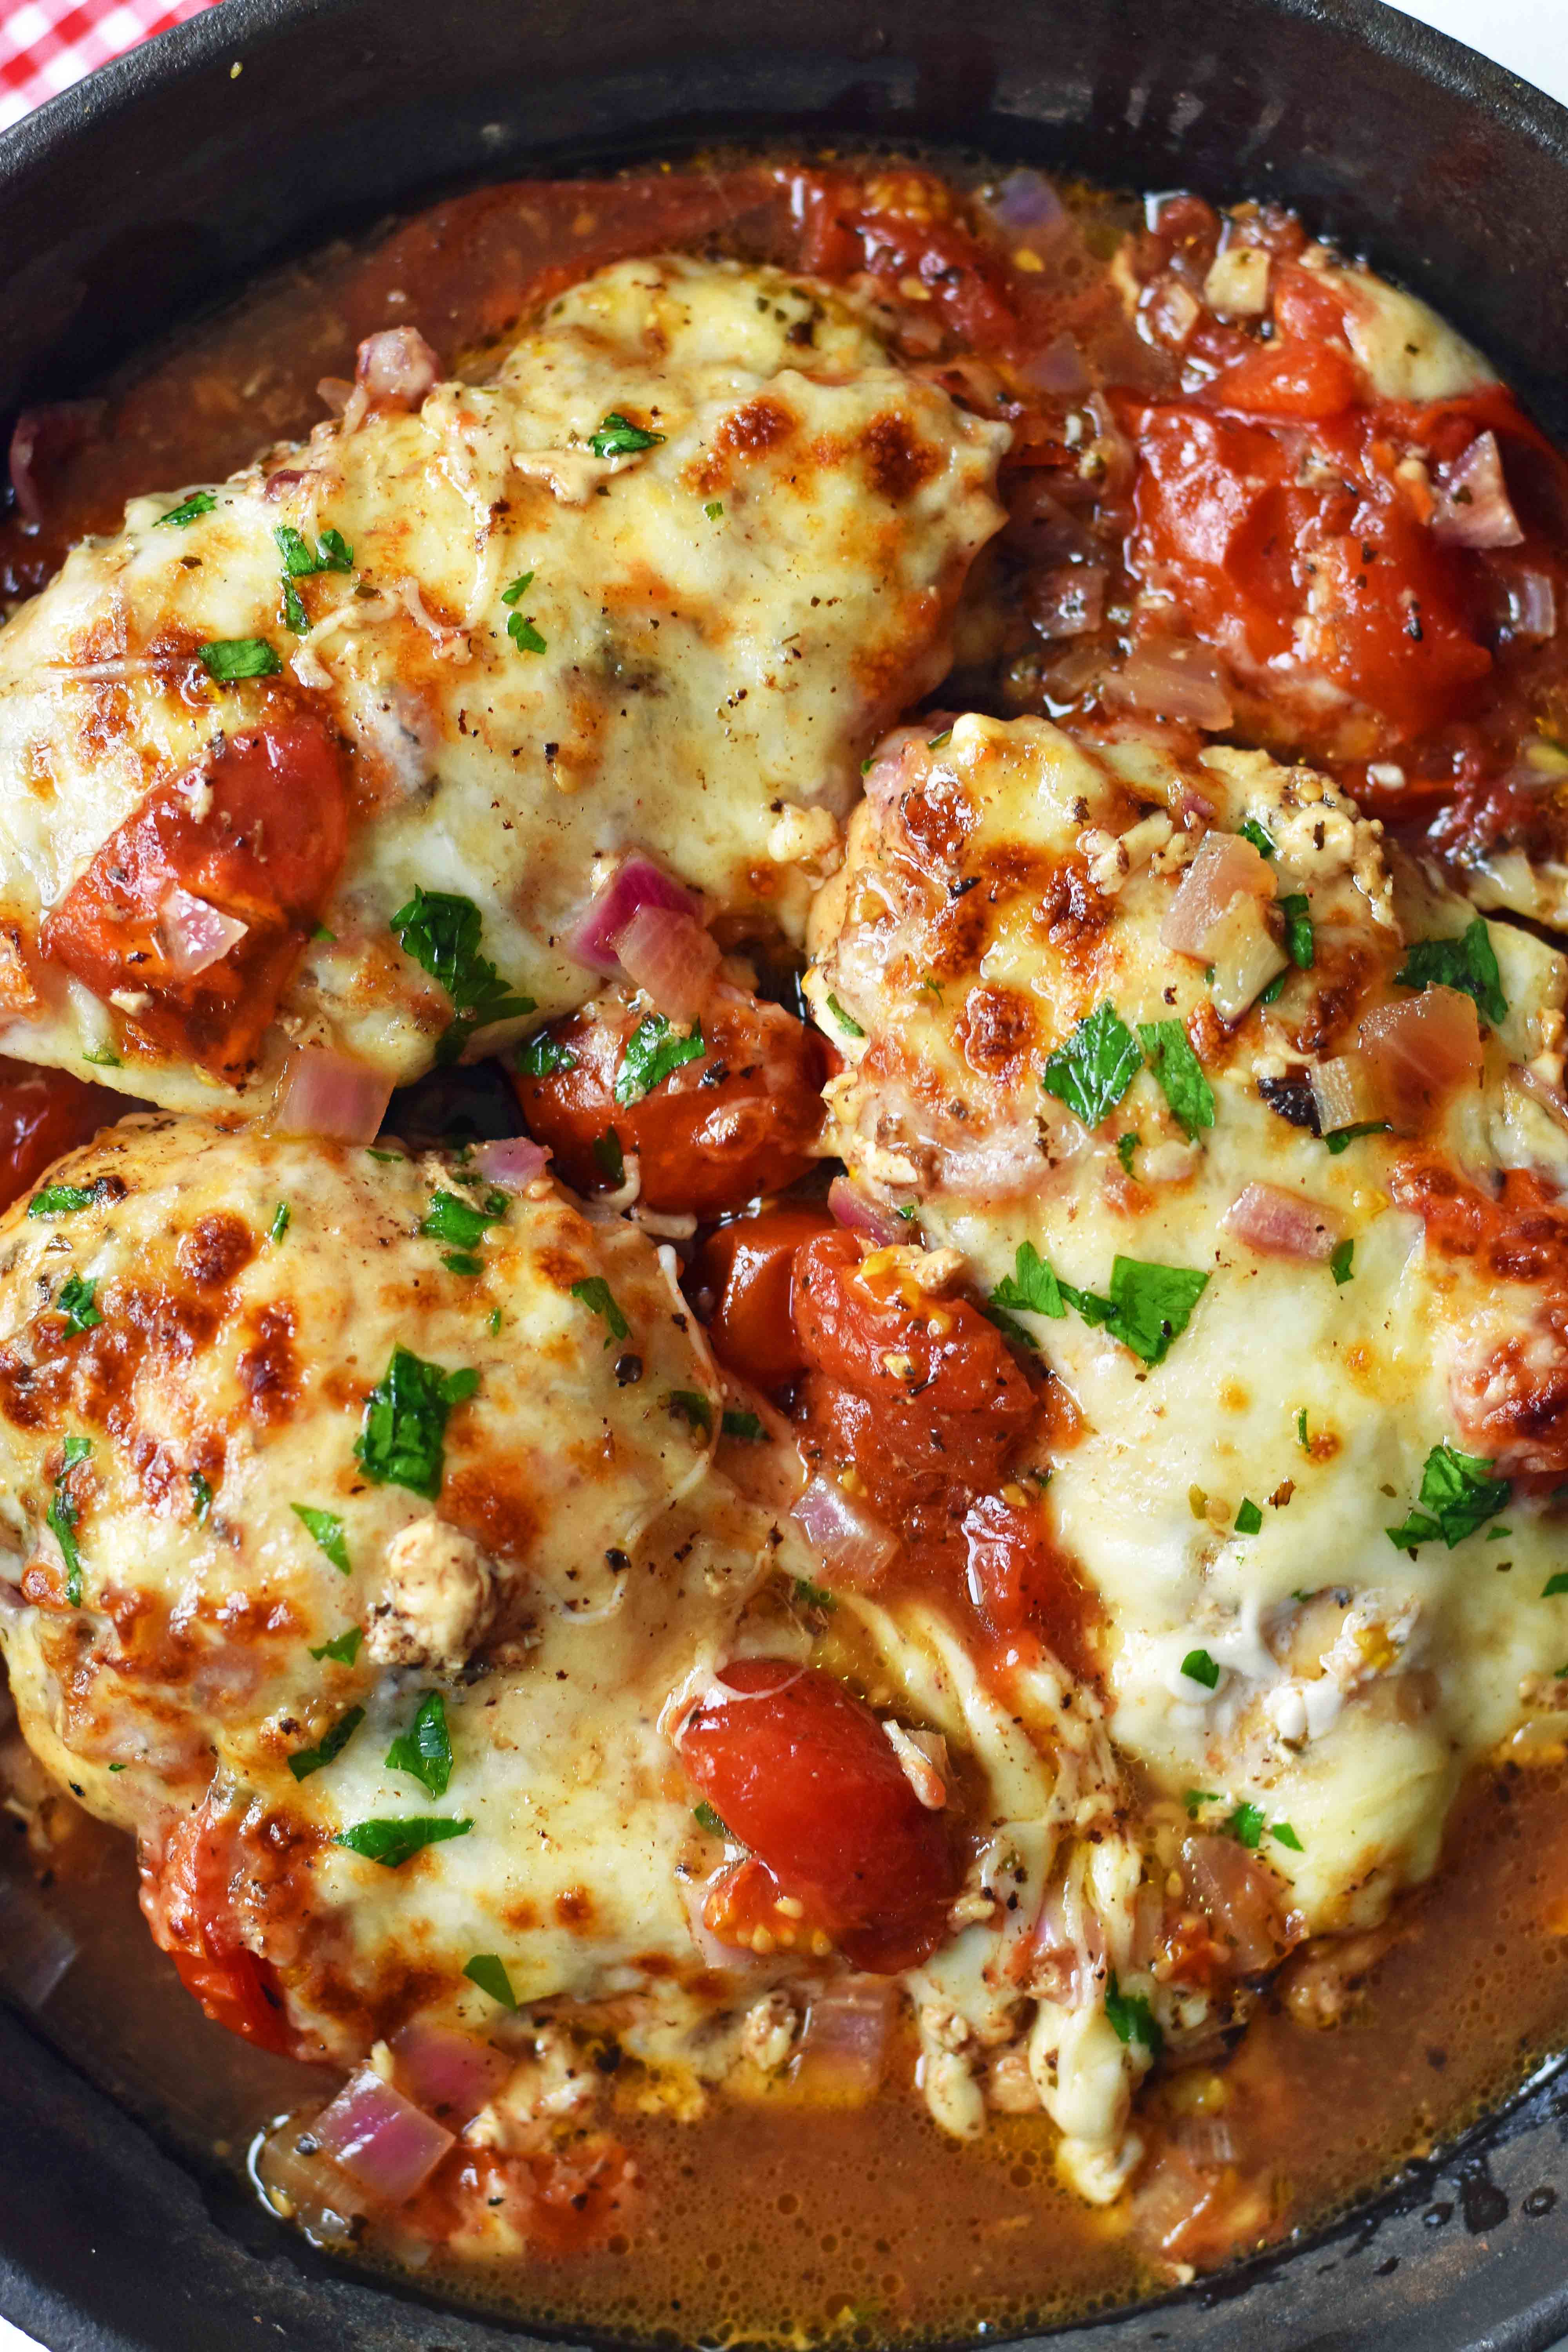 Baked Chicken Caprese. Oven-roasted chicken with Italian spices, sweet balsamic tomatoes, and melted mozzarella cheese. An easy 30-minute meal that your whole family will love. Chicken Breast with oven-roasted tomatoes and fresh mozzarella. www.modernhoney.com #dinner #30minutemeals #chicken